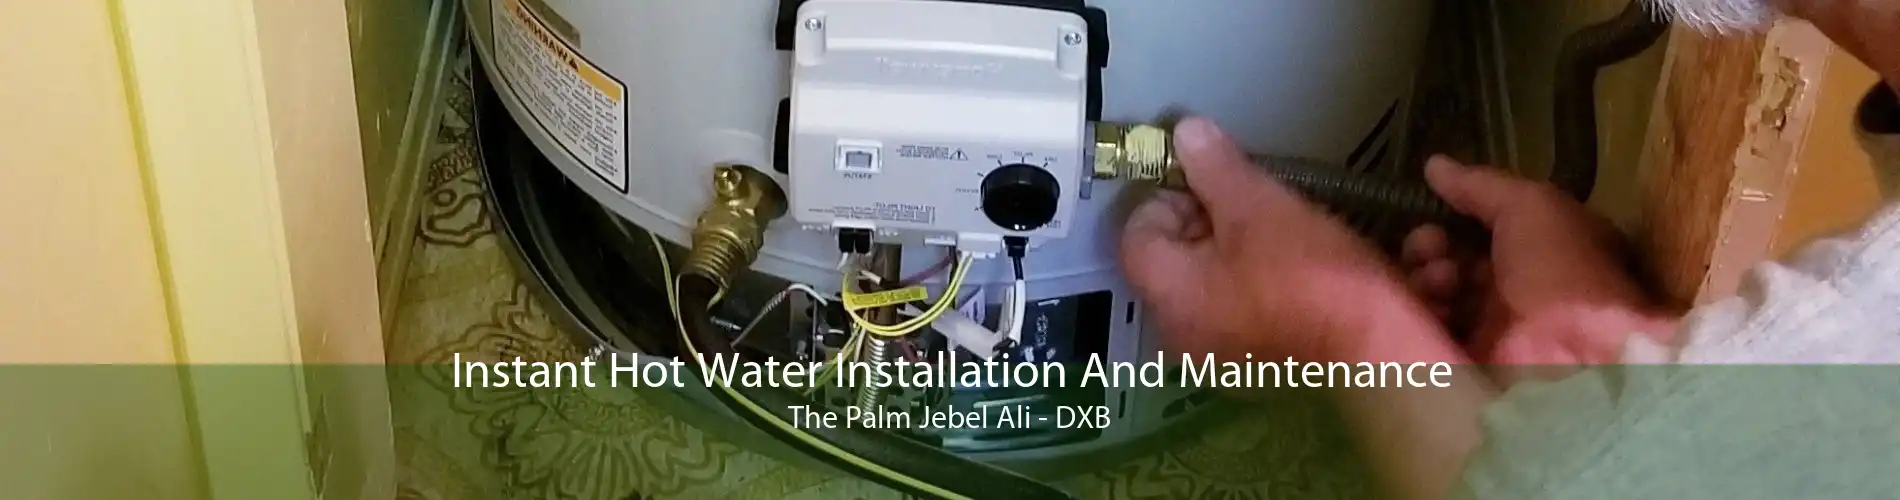 Instant Hot Water Installation And Maintenance The Palm Jebel Ali - DXB